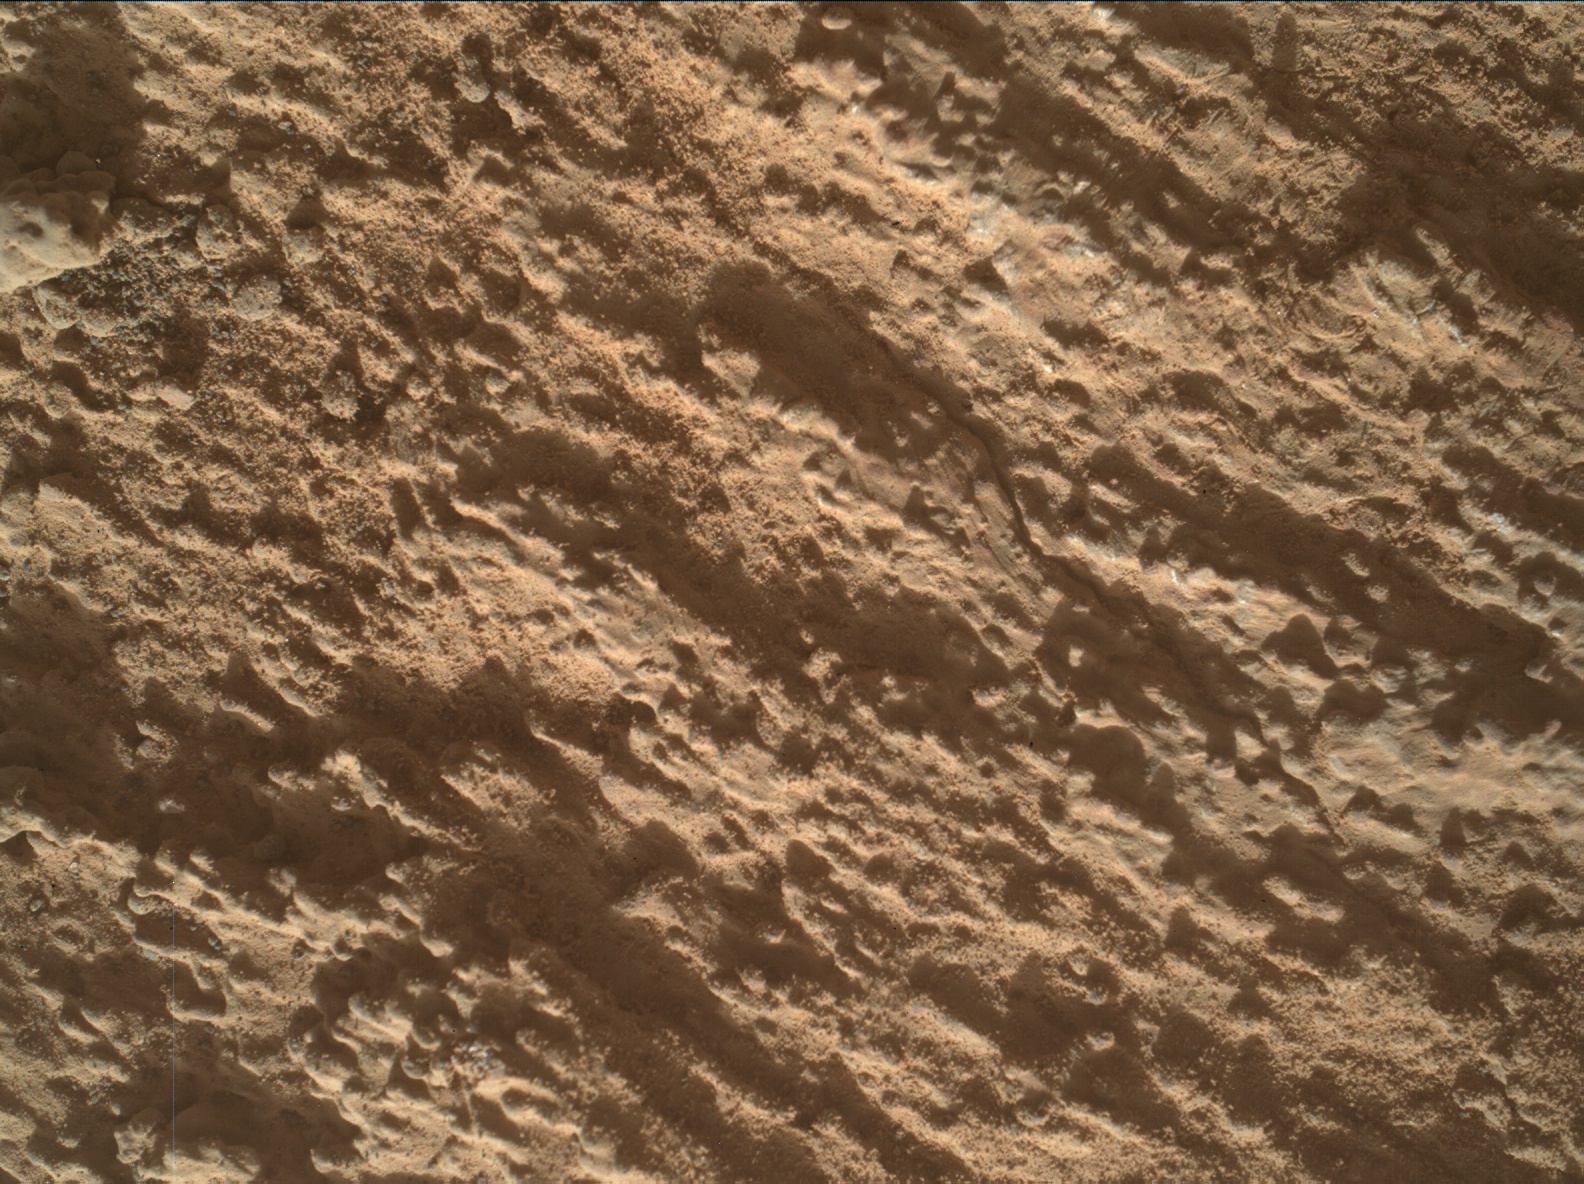 Nasa's Mars rover Curiosity acquired this image using its Mars Hand Lens Imager (MAHLI) on Sol 3214